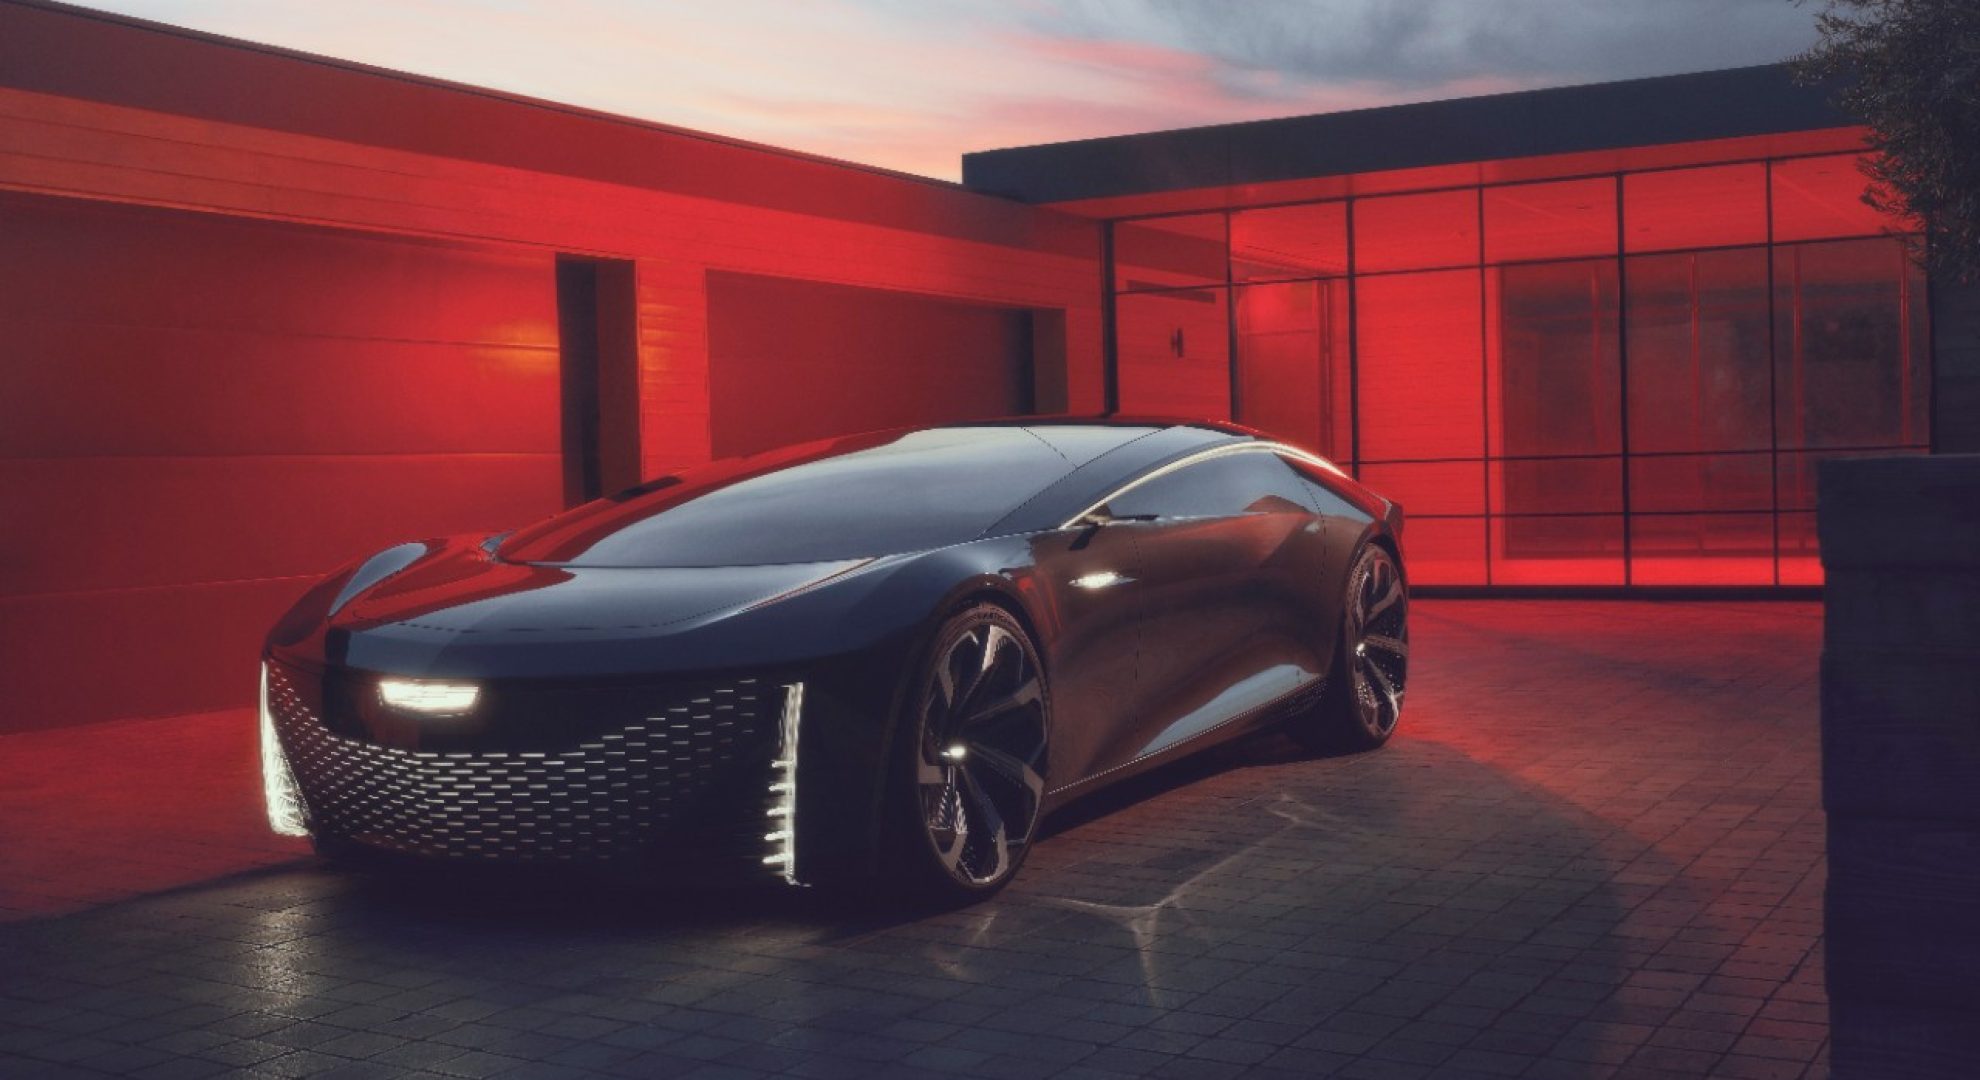 Cadillac expands its vision of personal autonomous future mobility with the InnerSpace concept — a dramatic, two-passenger electric and autonomous luxury vehicle.